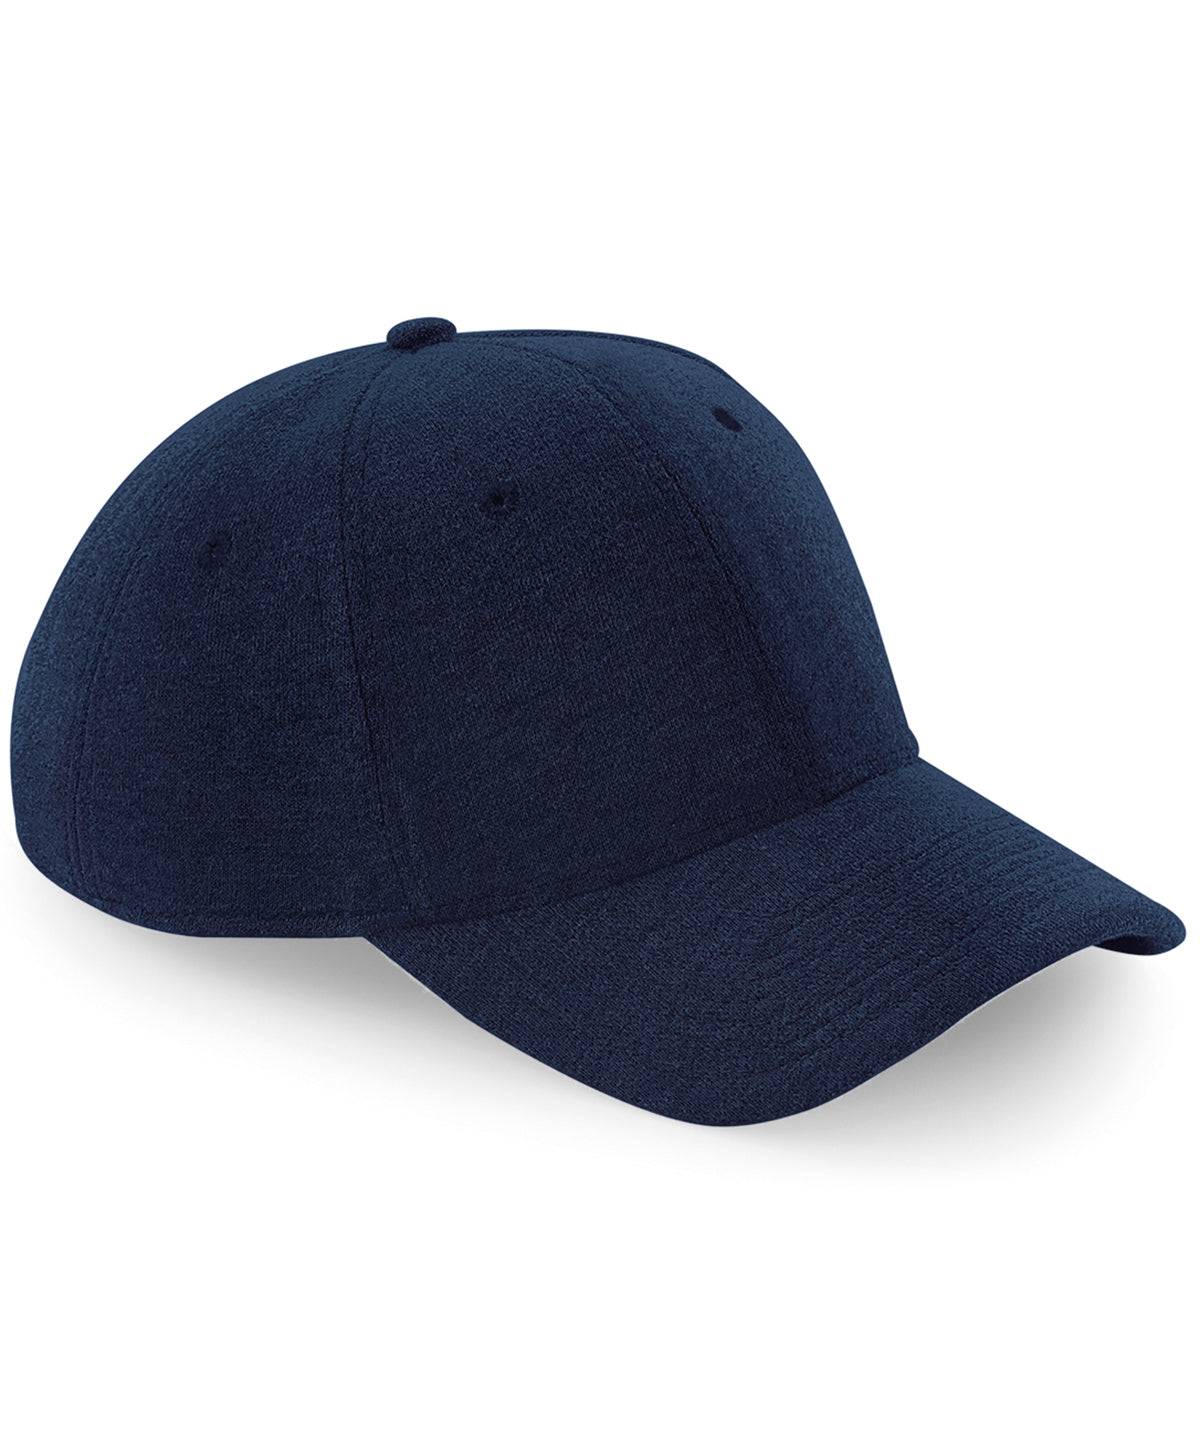 Load image into Gallery viewer, French Navy - Jersey athleisure baseball cap
